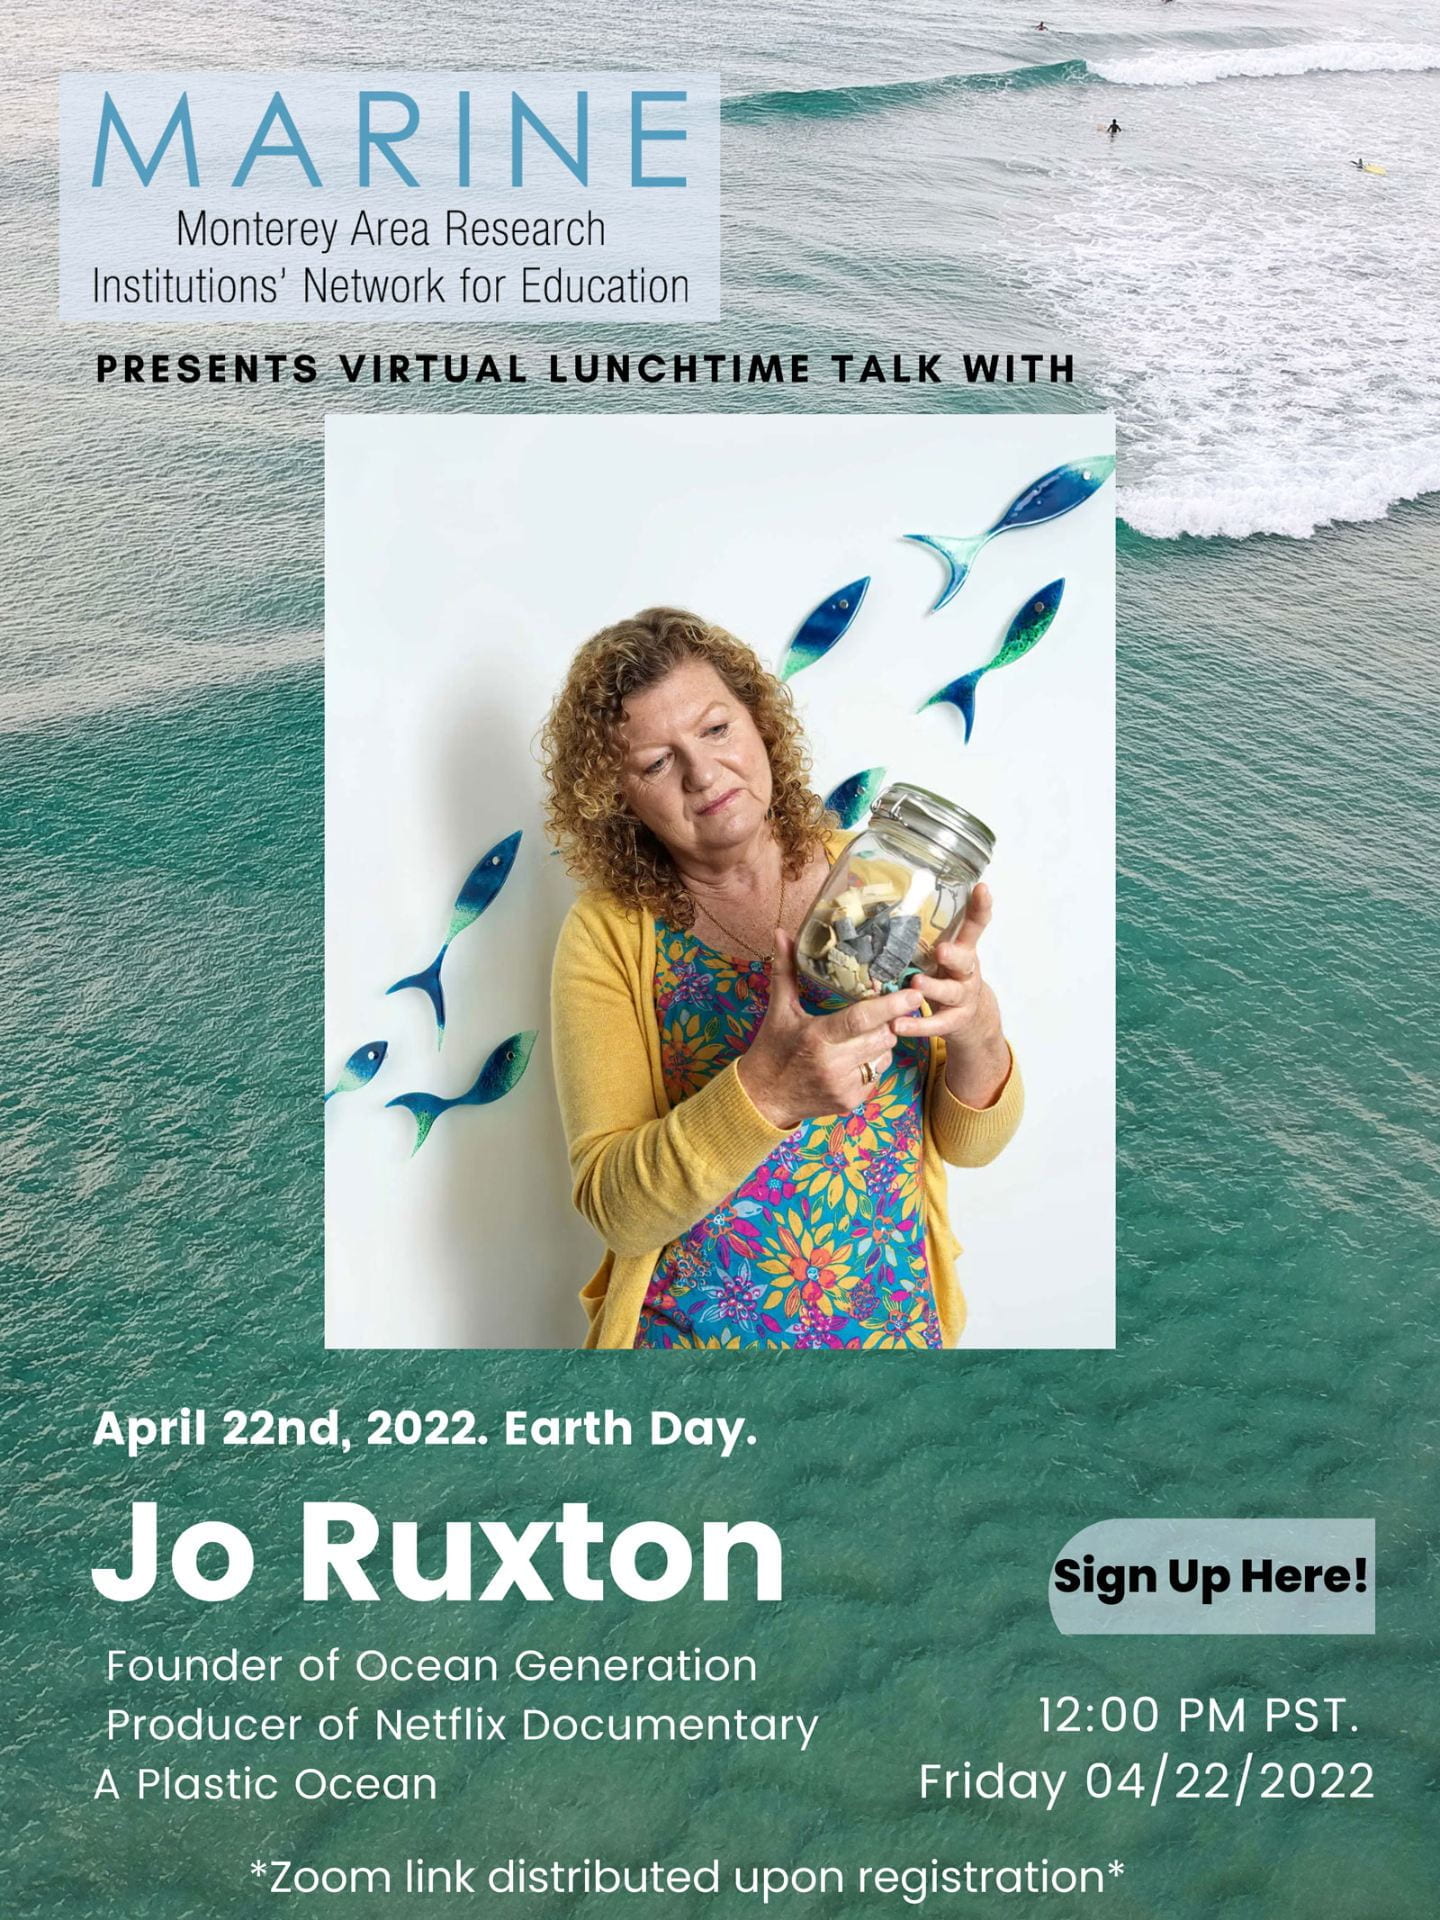 Jo Ruston in the middle of the flyer for a virtual presentation